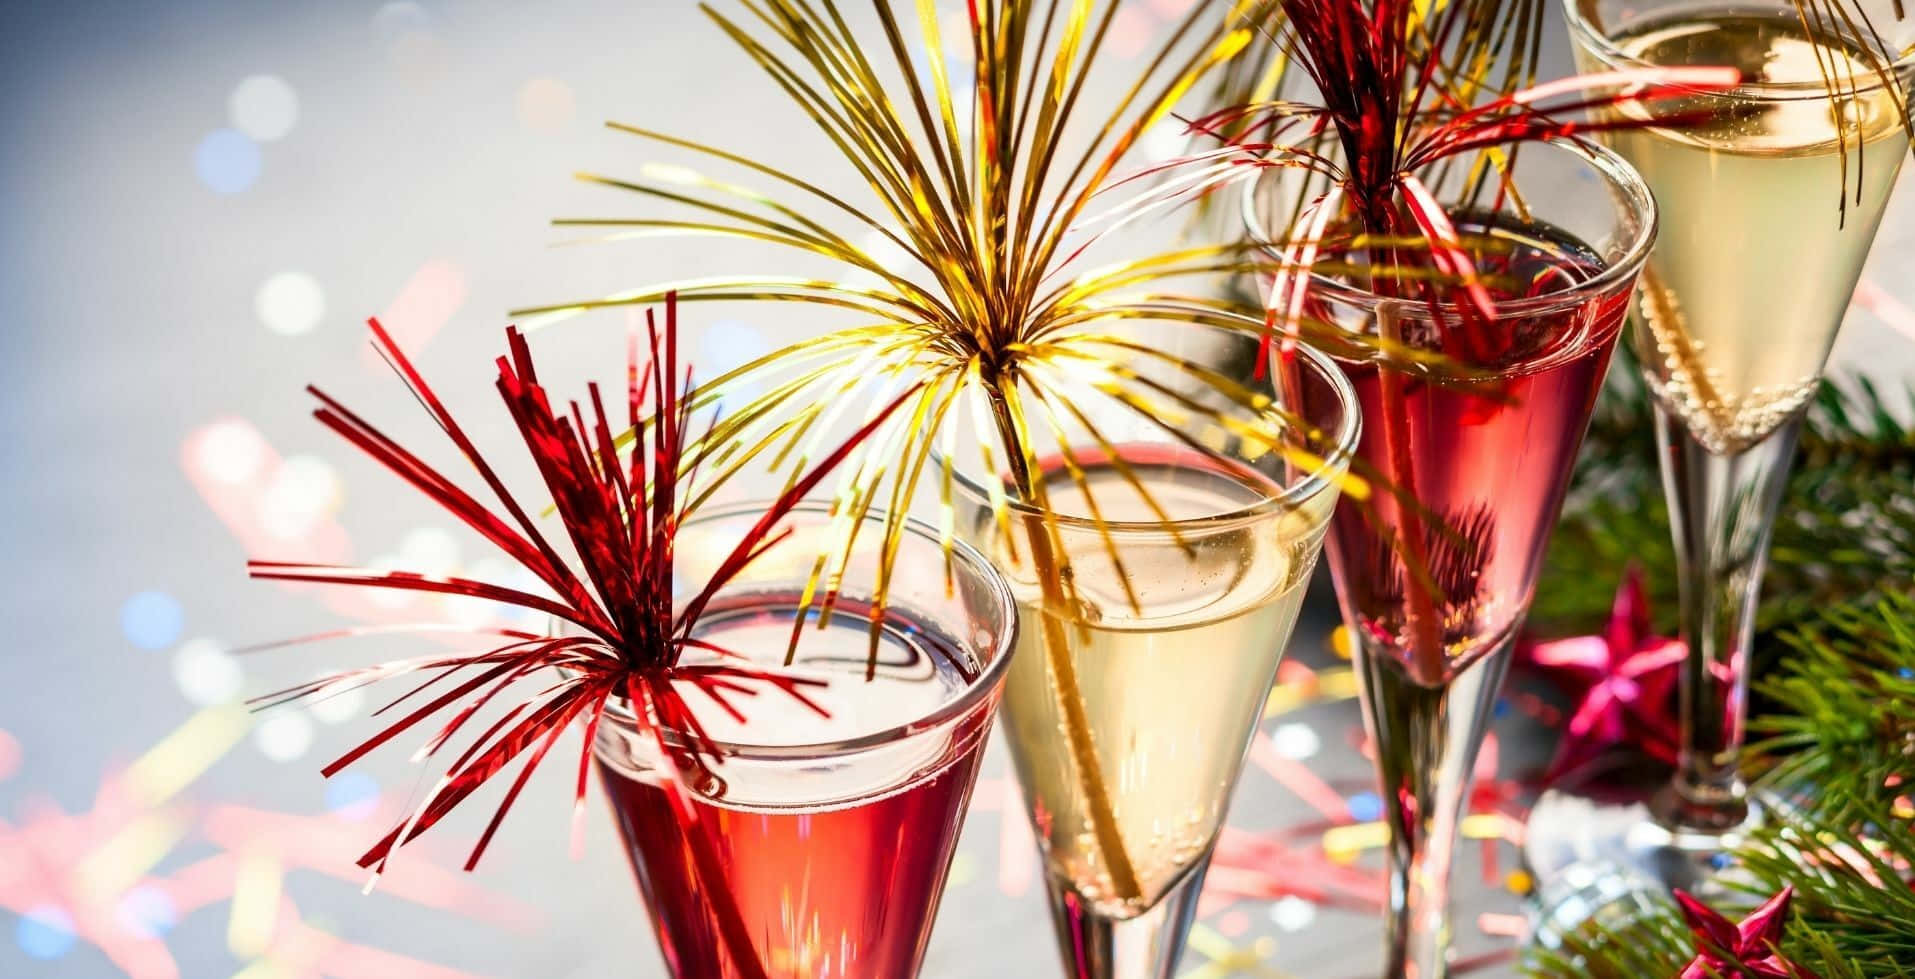 Make your New Year's Eve celebrations truly unforgettable this year!